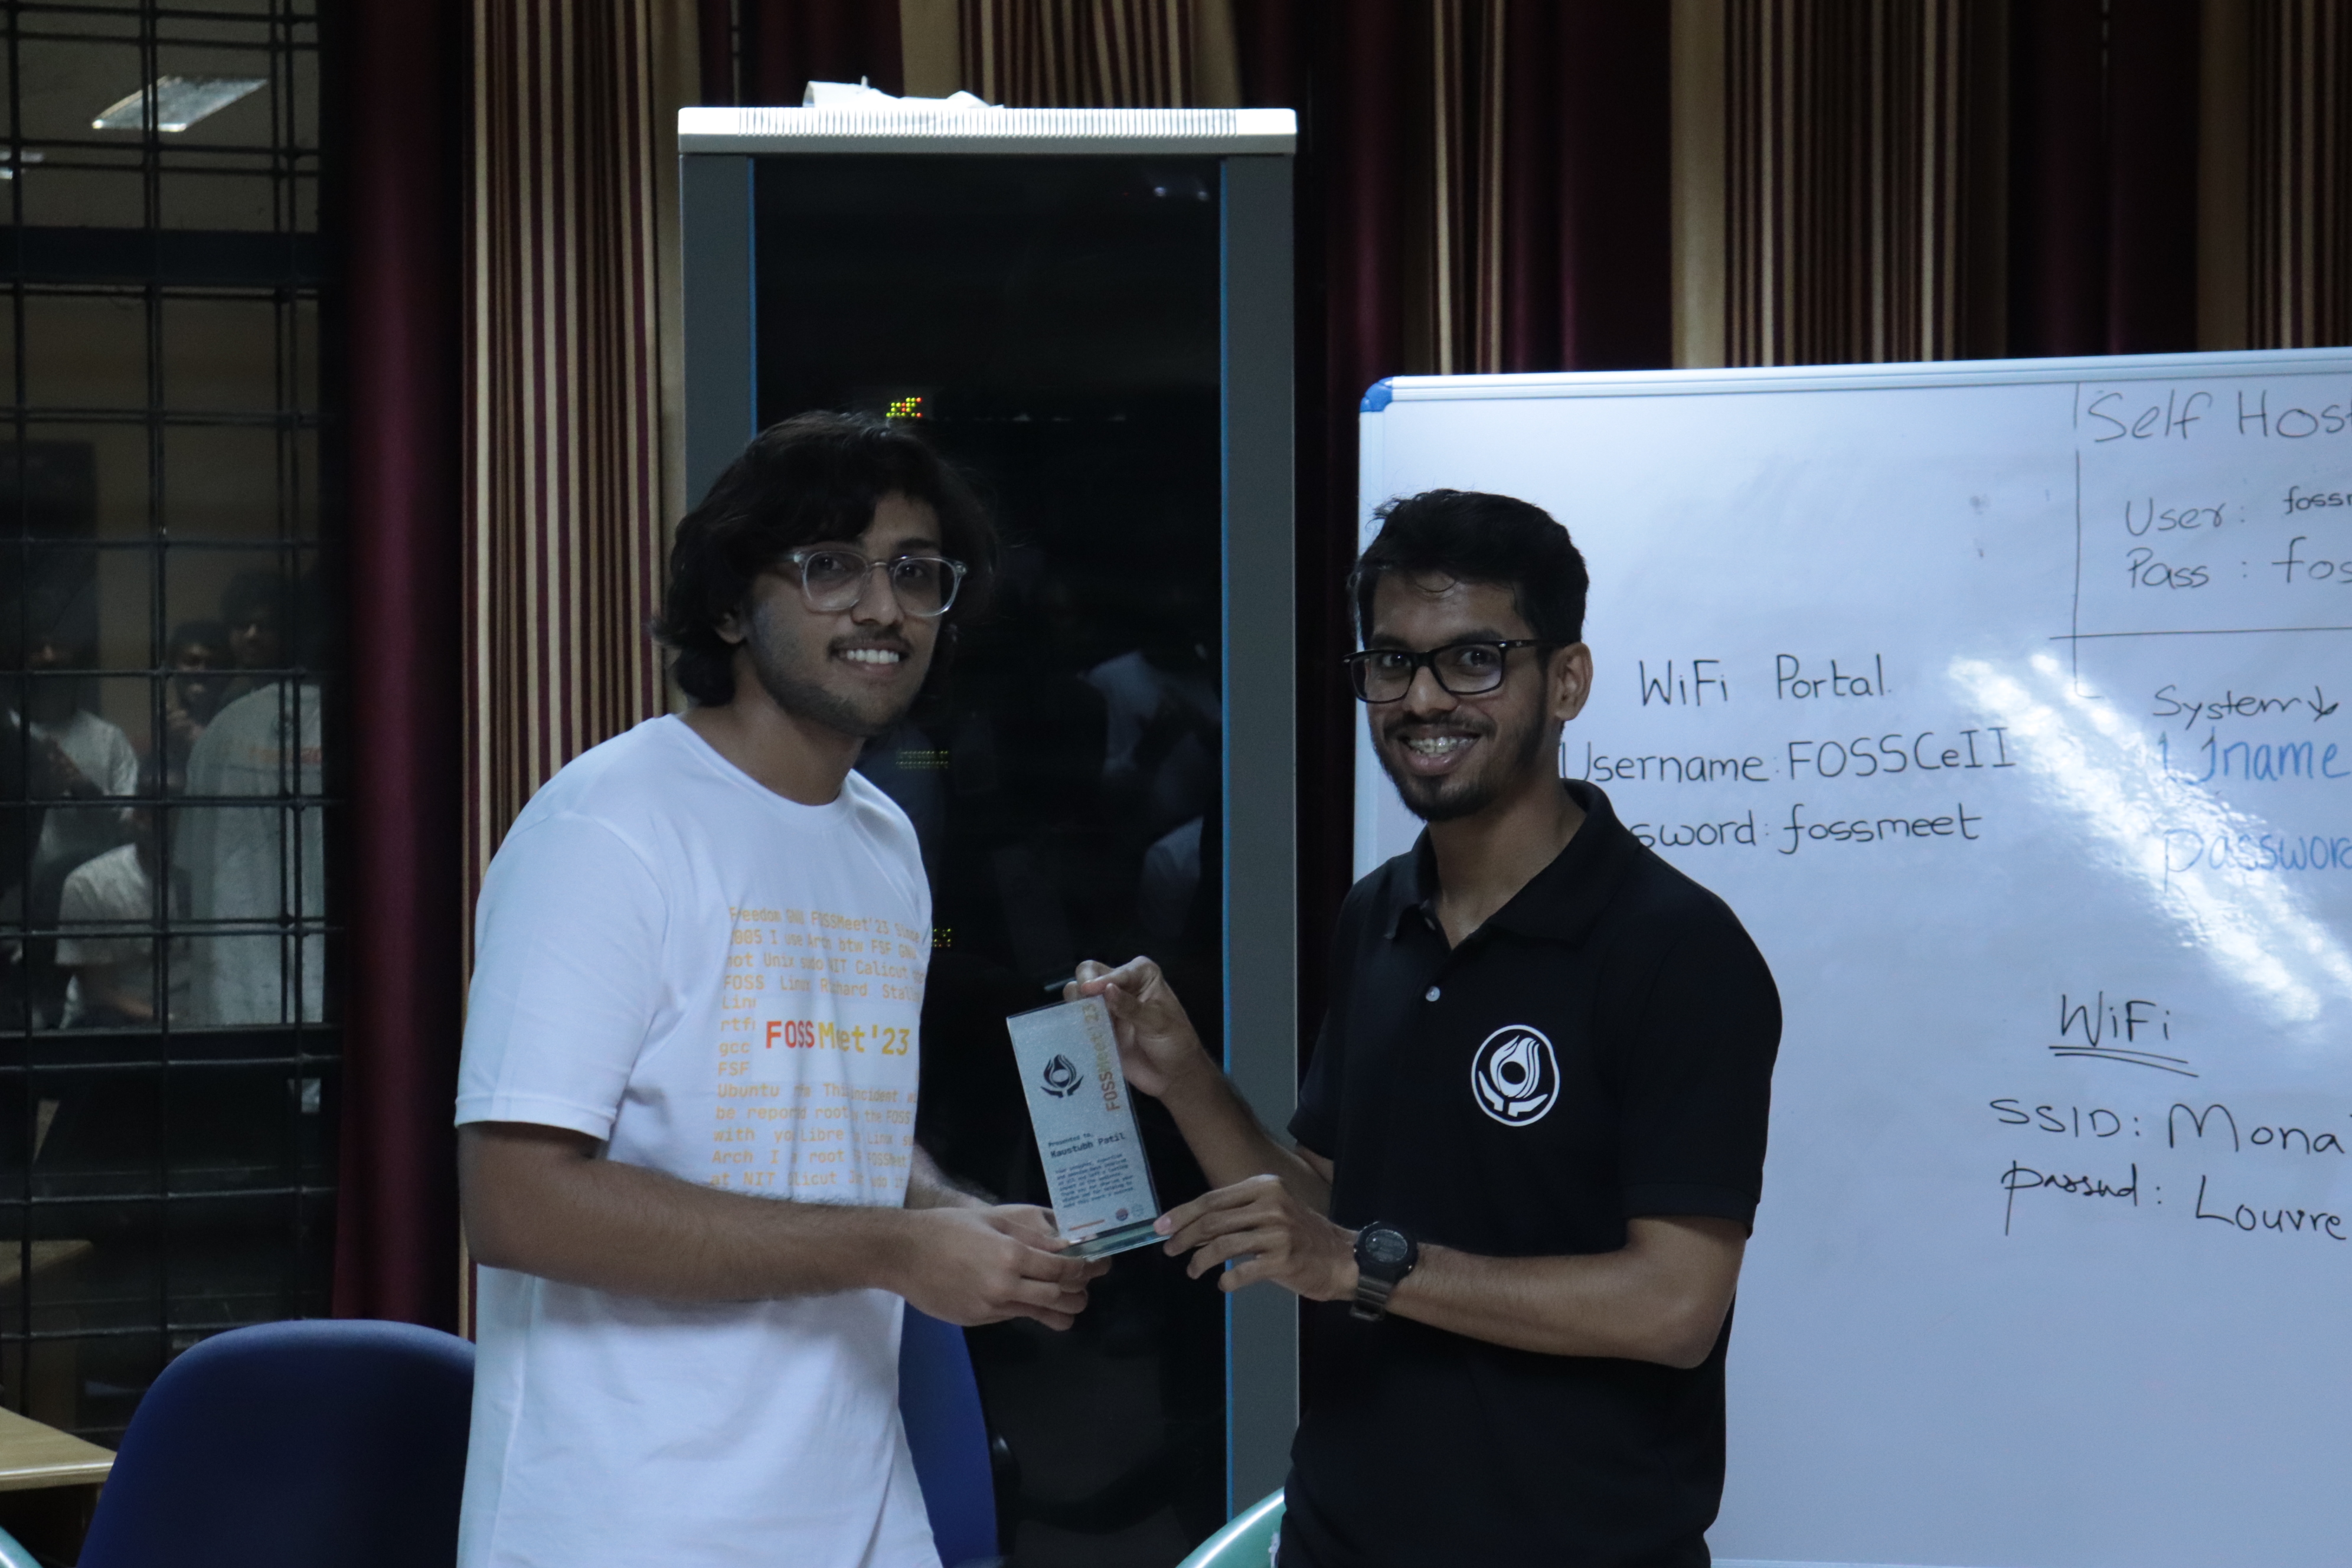 Me (left) accepitng a momento from Hadif (right), one of the two NITC students on my team